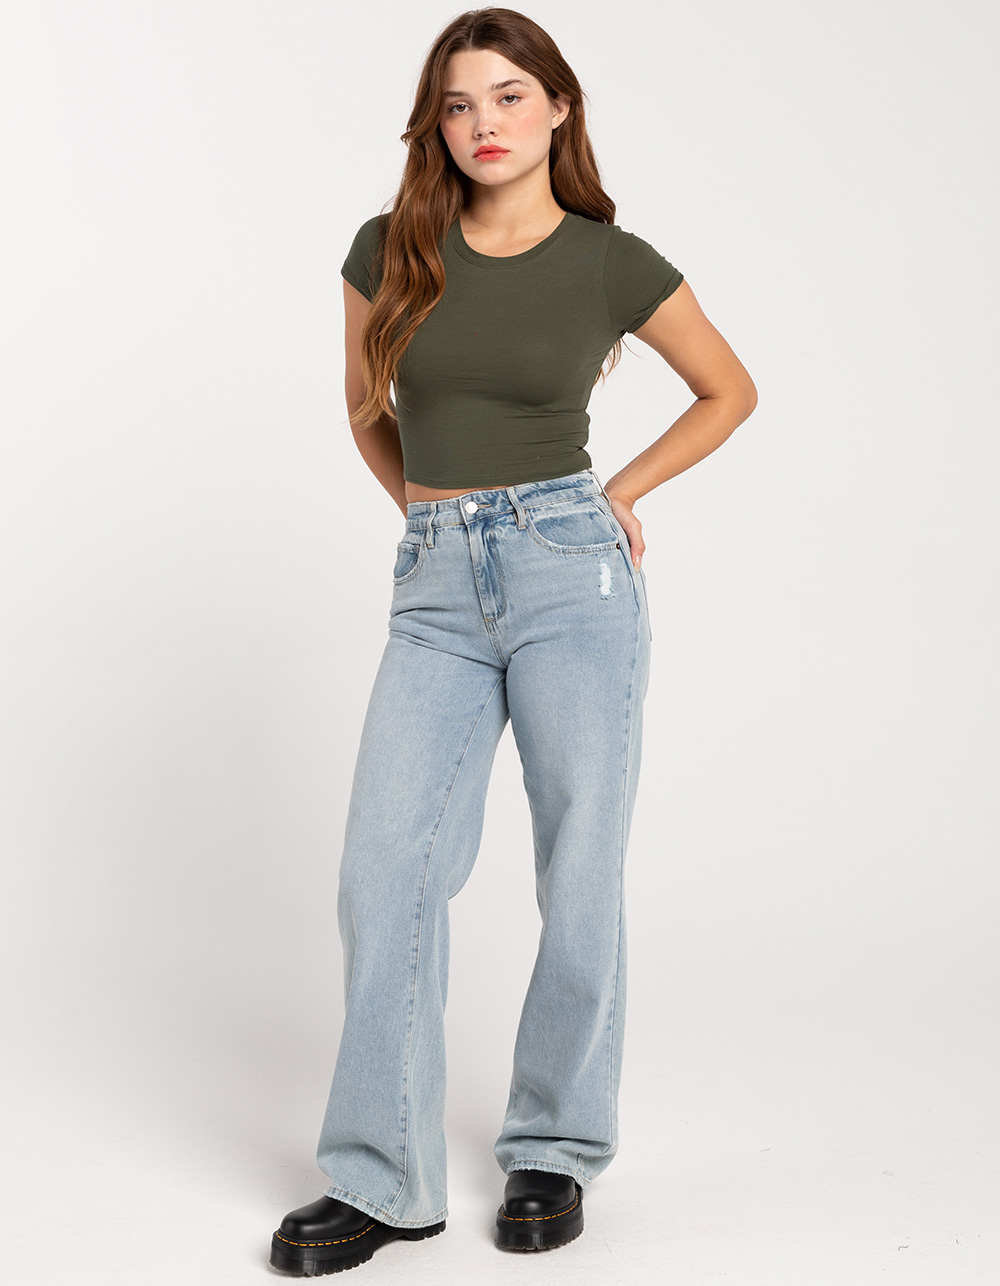 OLIVE Tee | Cropped - BOZZOLO Tillys Womens